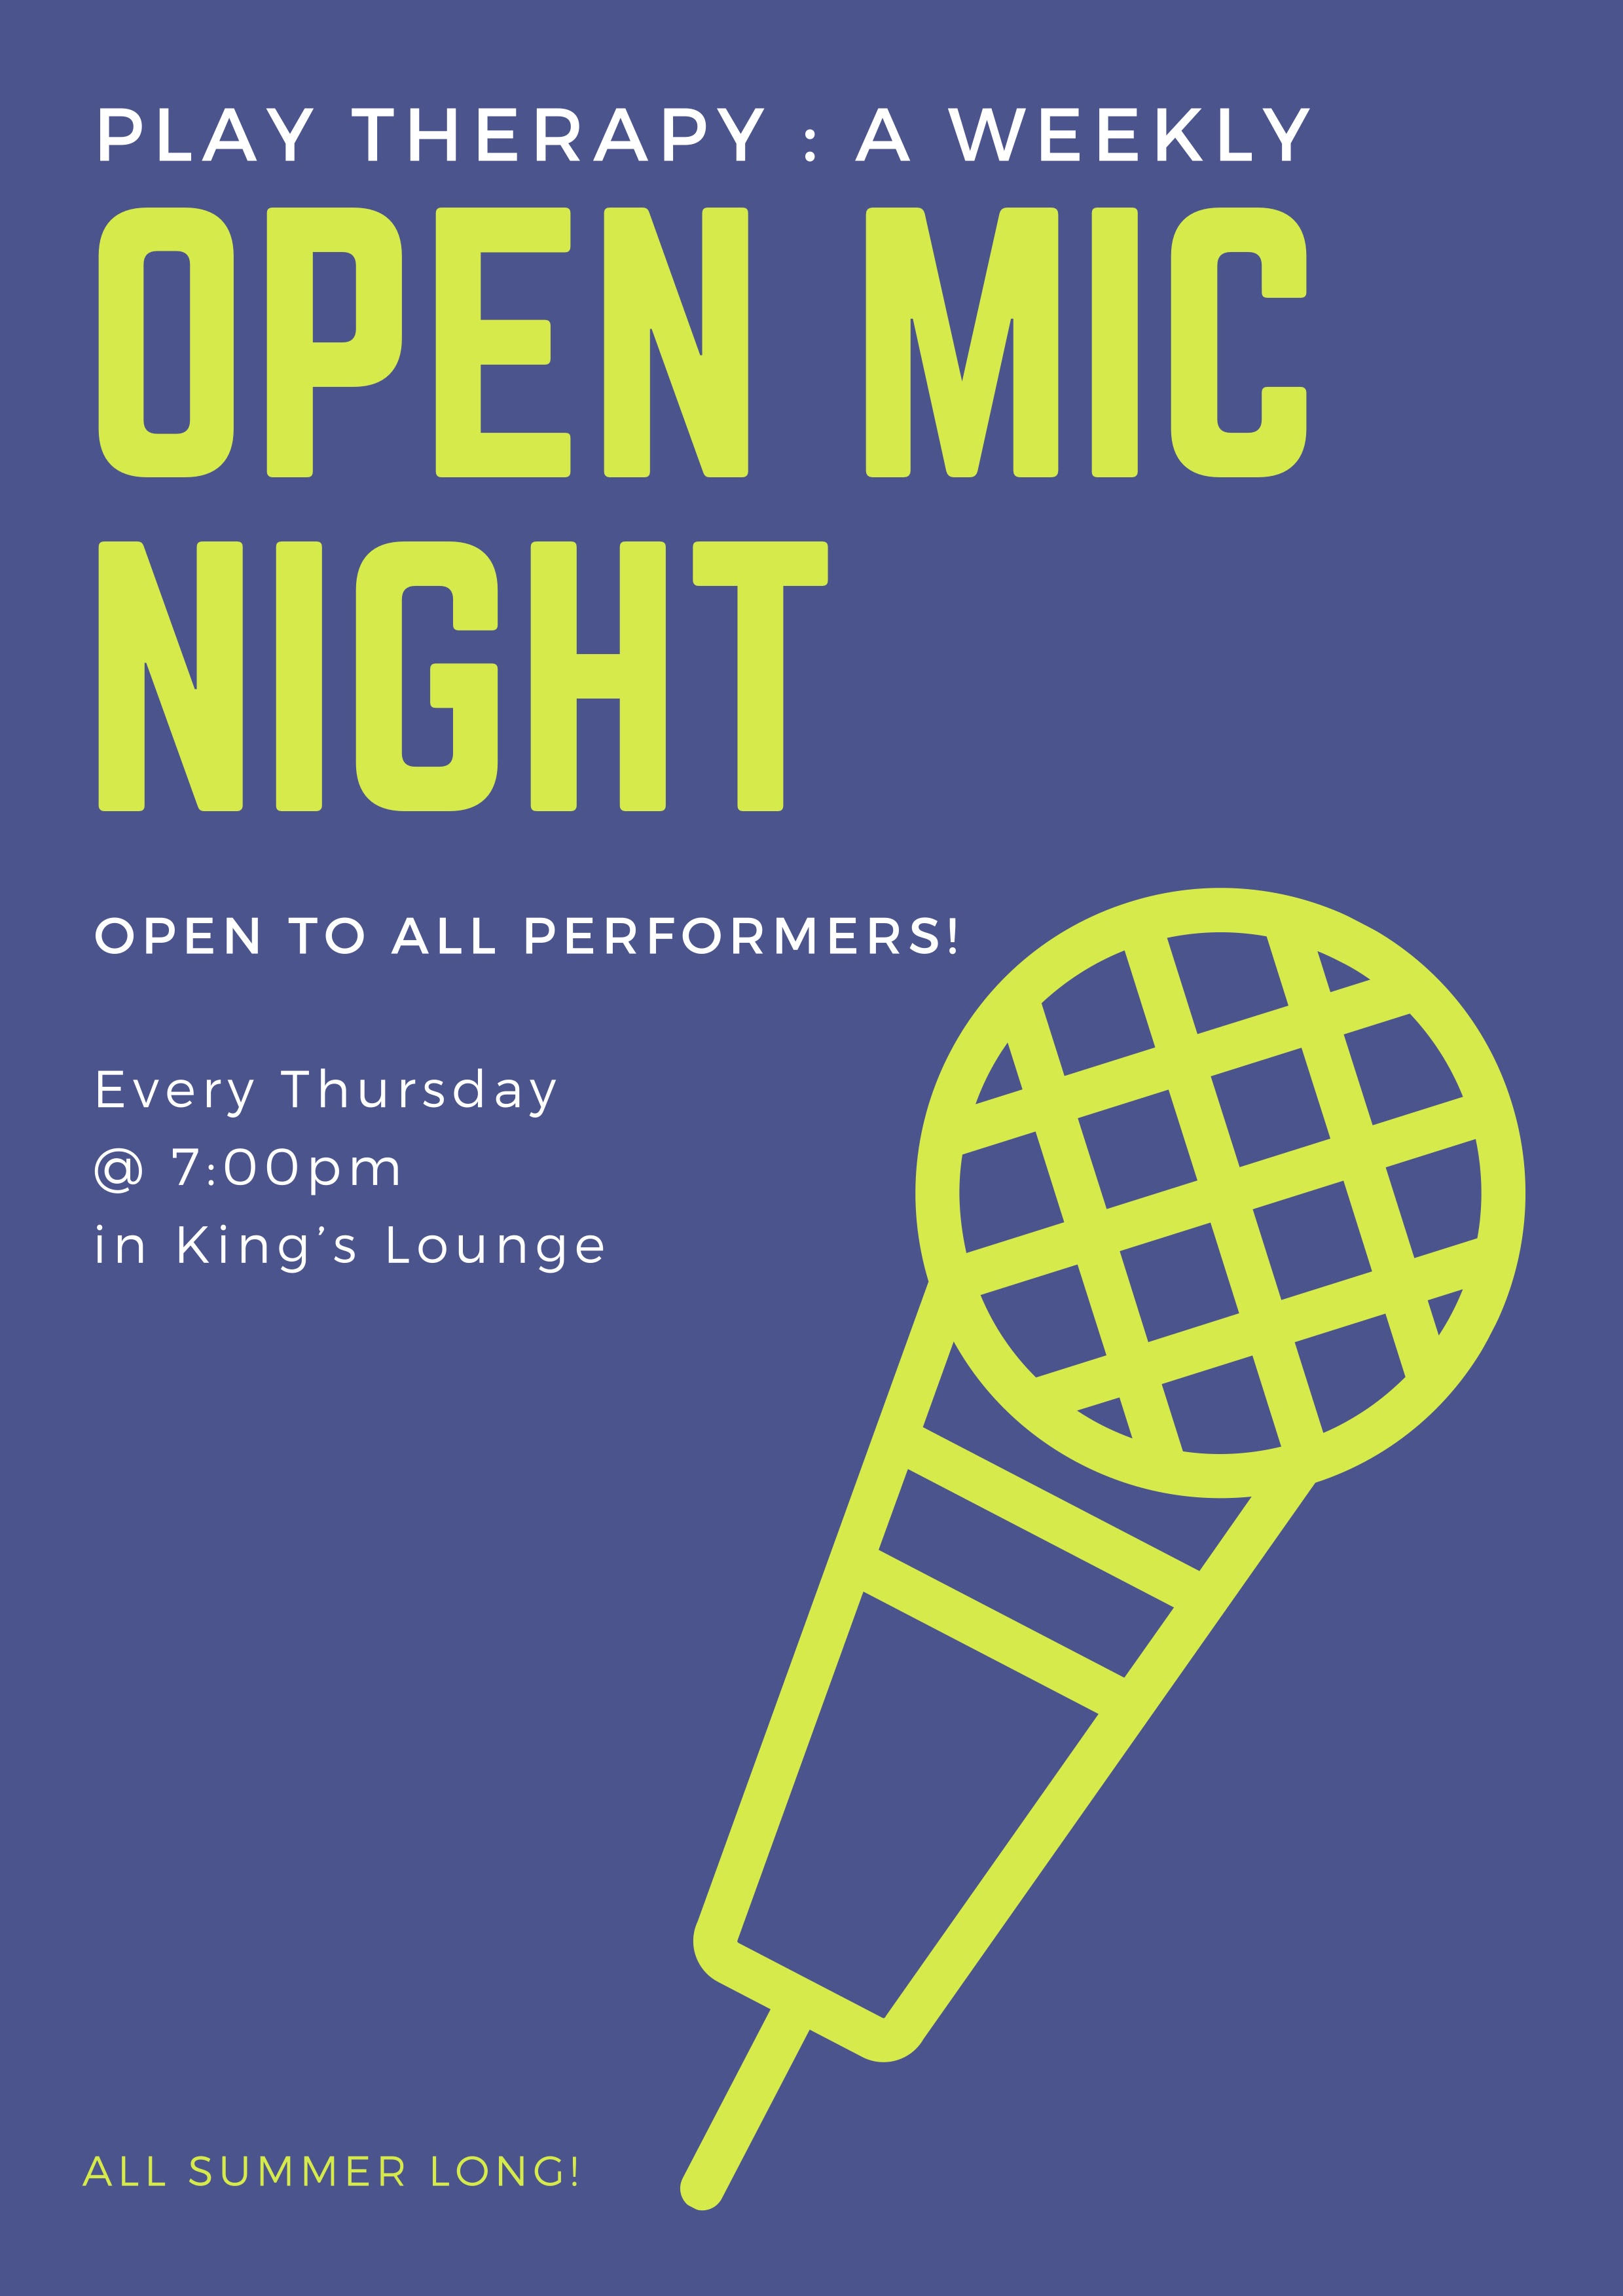 Play Therapy: A Weekly Open Mic Night